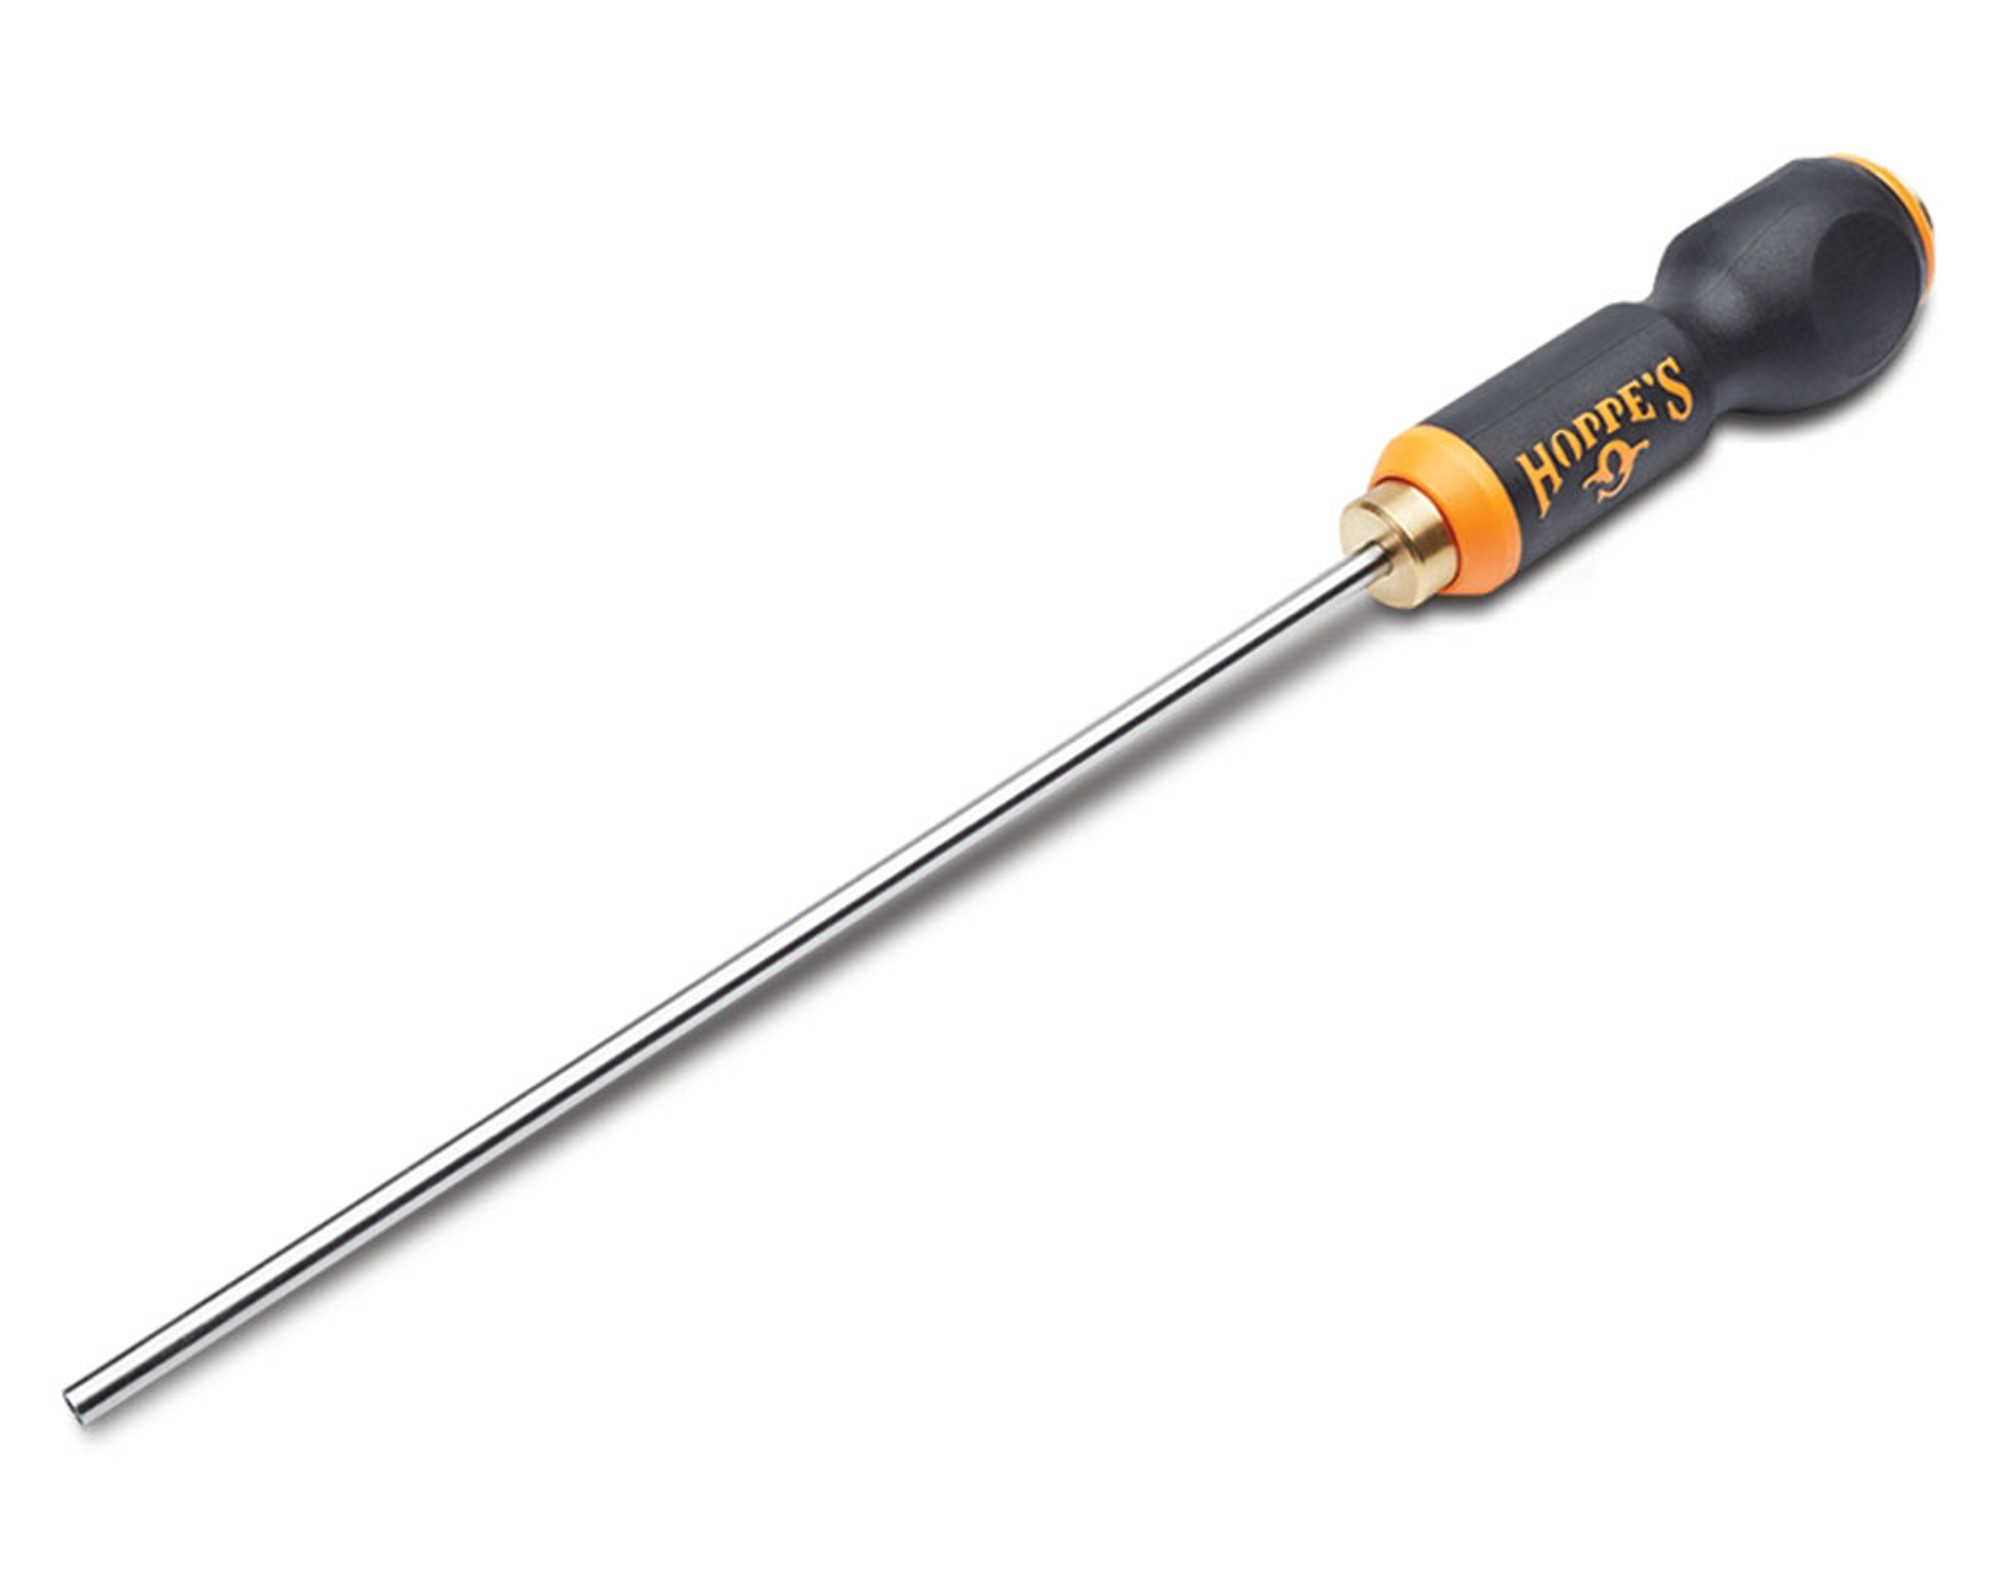 17 Cal 36" One Piece Stainless Steel Cleaning Rod